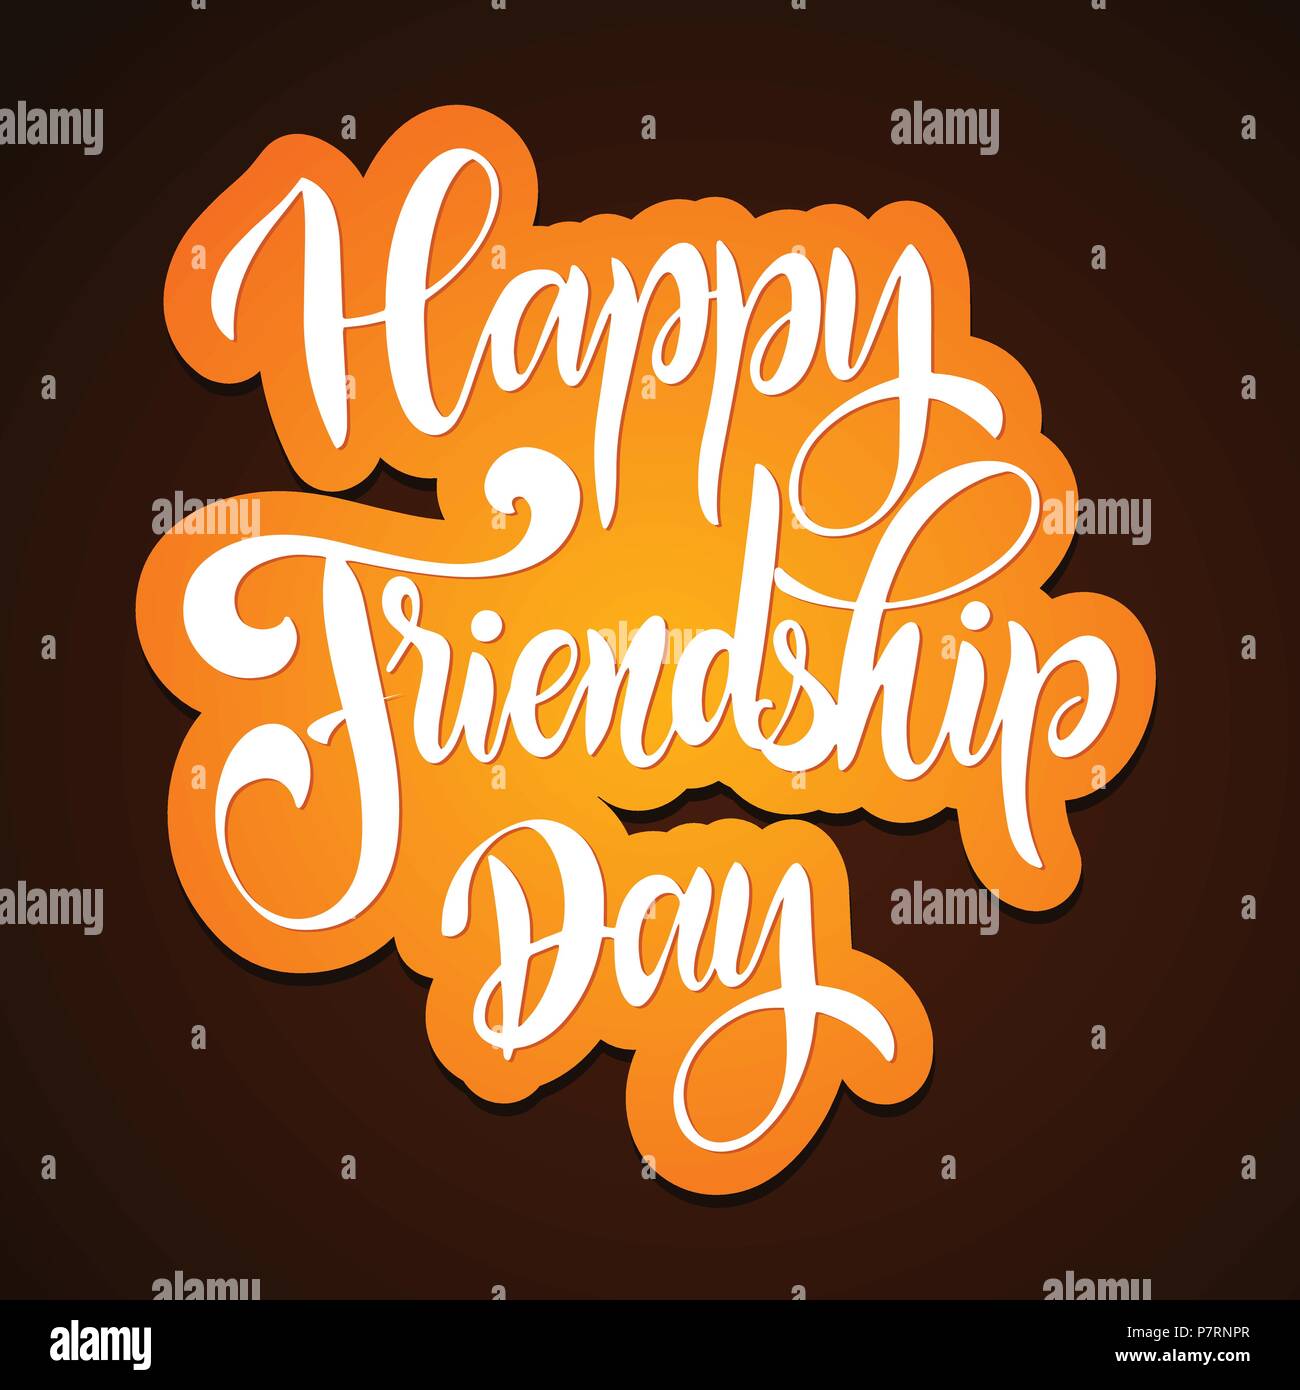 friendship day hand drawn lettering vector elements for invitations posters greeting cards t shirt design stock vector image art alamy https www alamy com friendship day hand drawn lettering vector elements for invitations posters greeting cards t shirt design image211349007 html